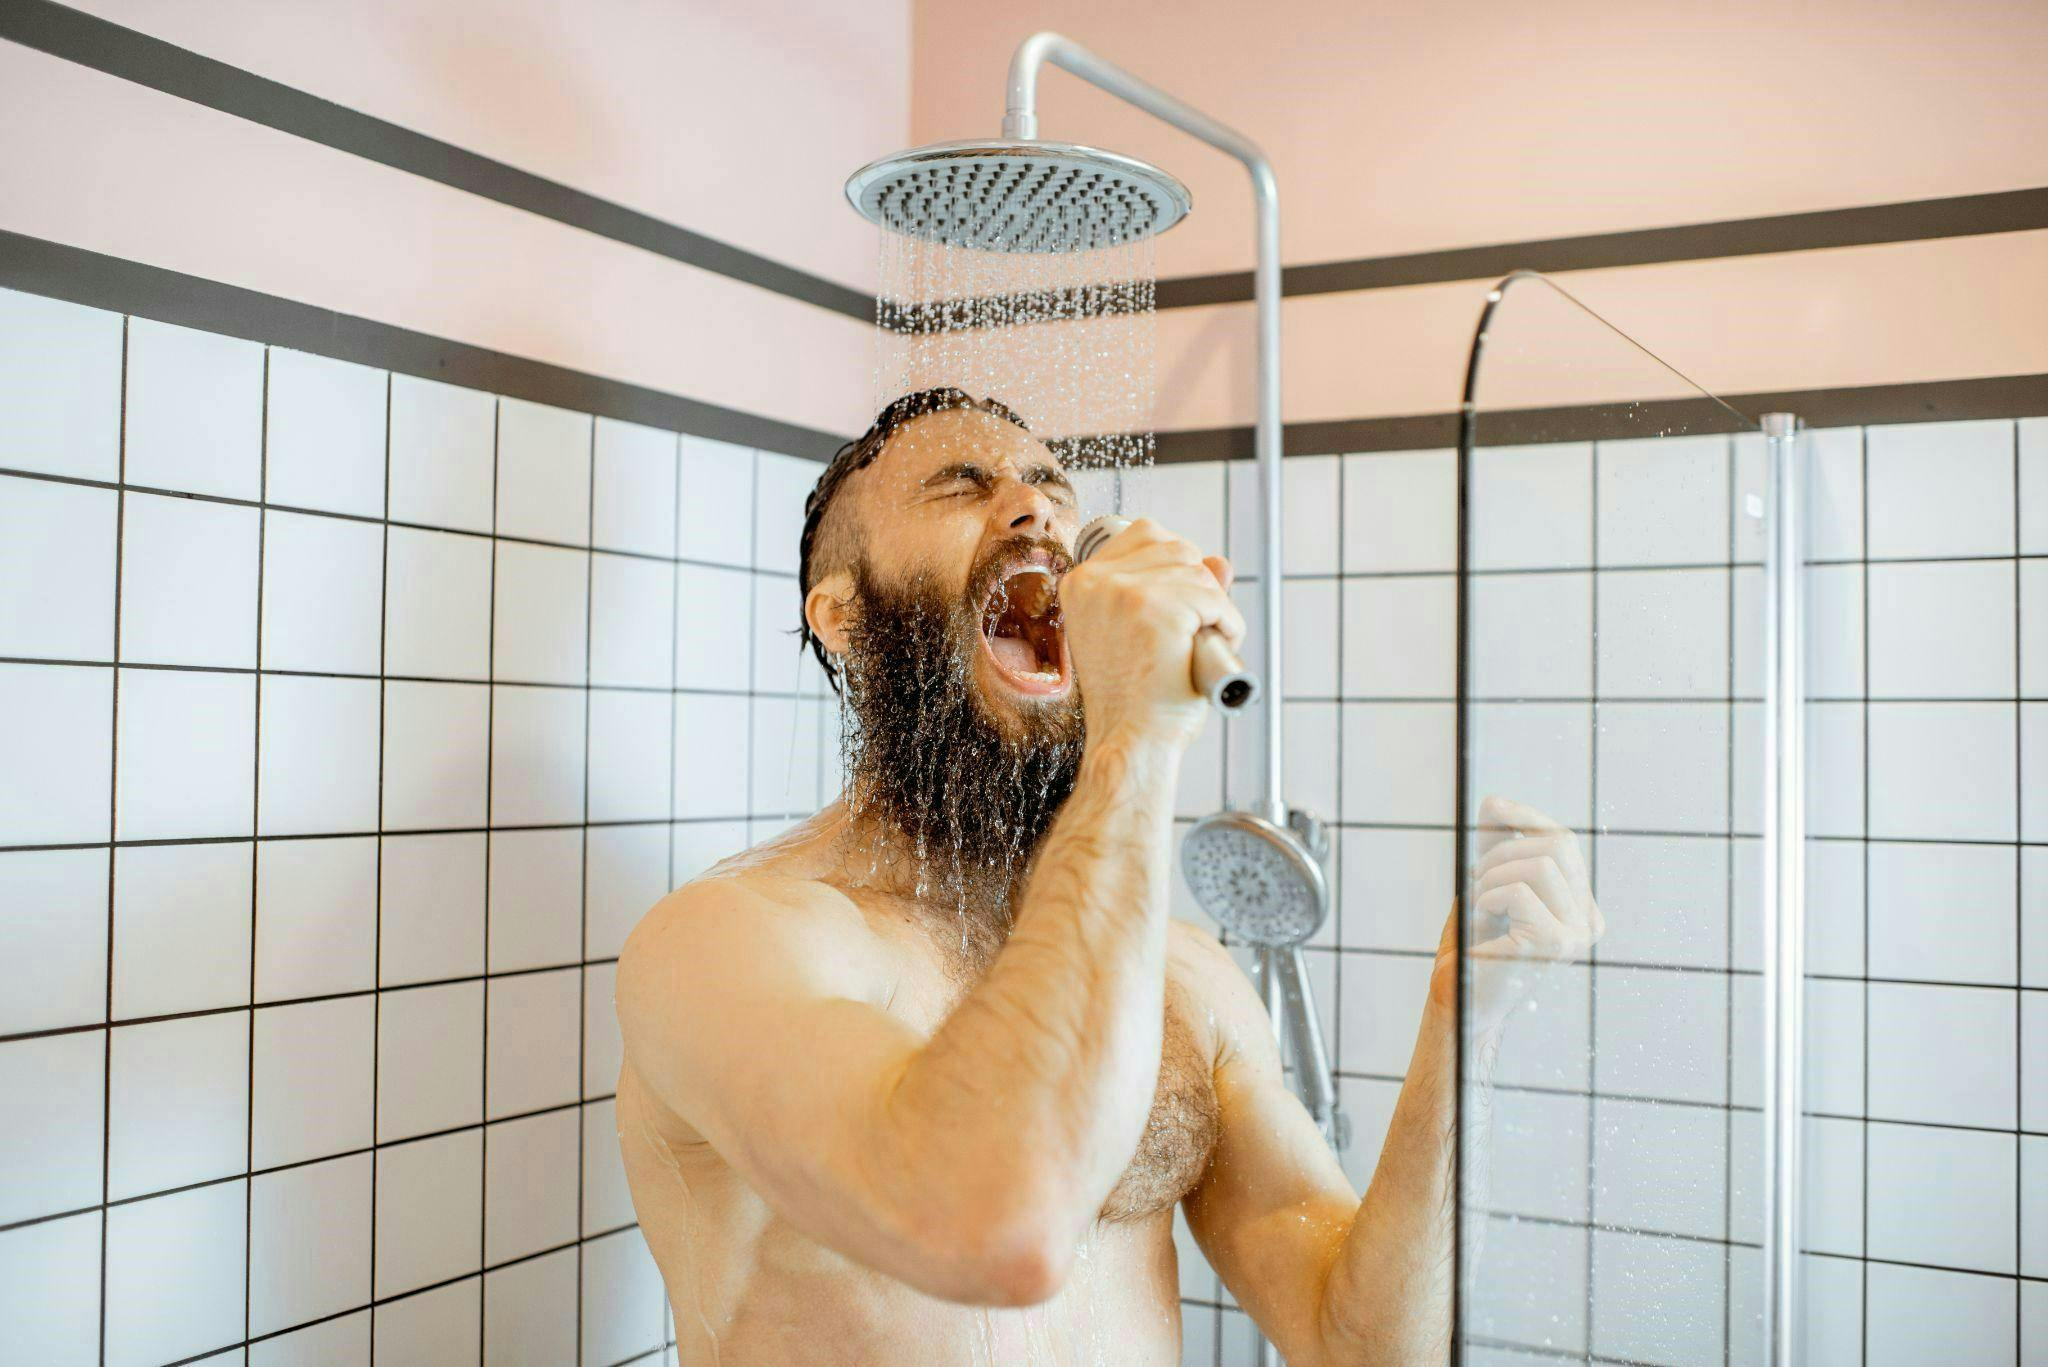 HARD WATER VS. SOFT WATER MAN IN SHOWER FUNNY PHOTO